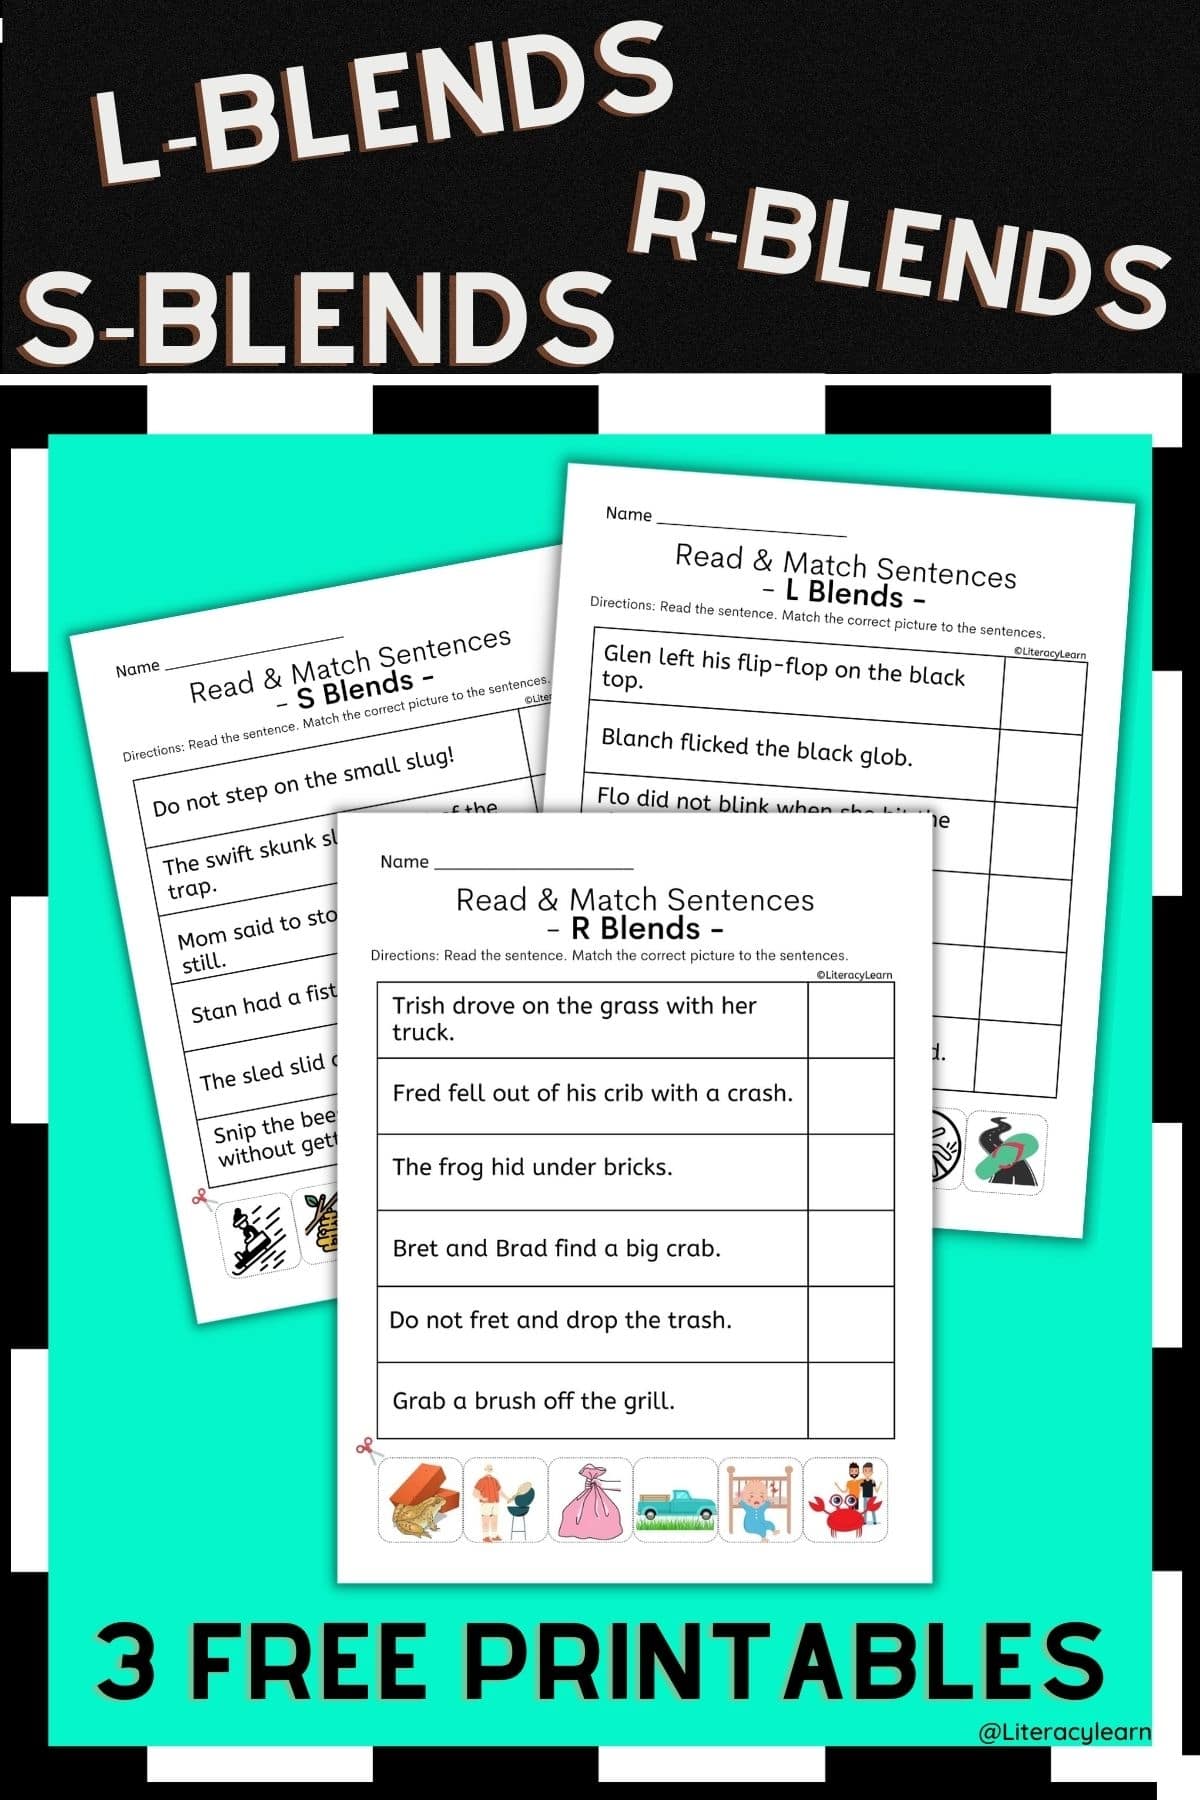 Green and black image with L-blends, R-Blends, S-Blend Sentences worksheets featured. 